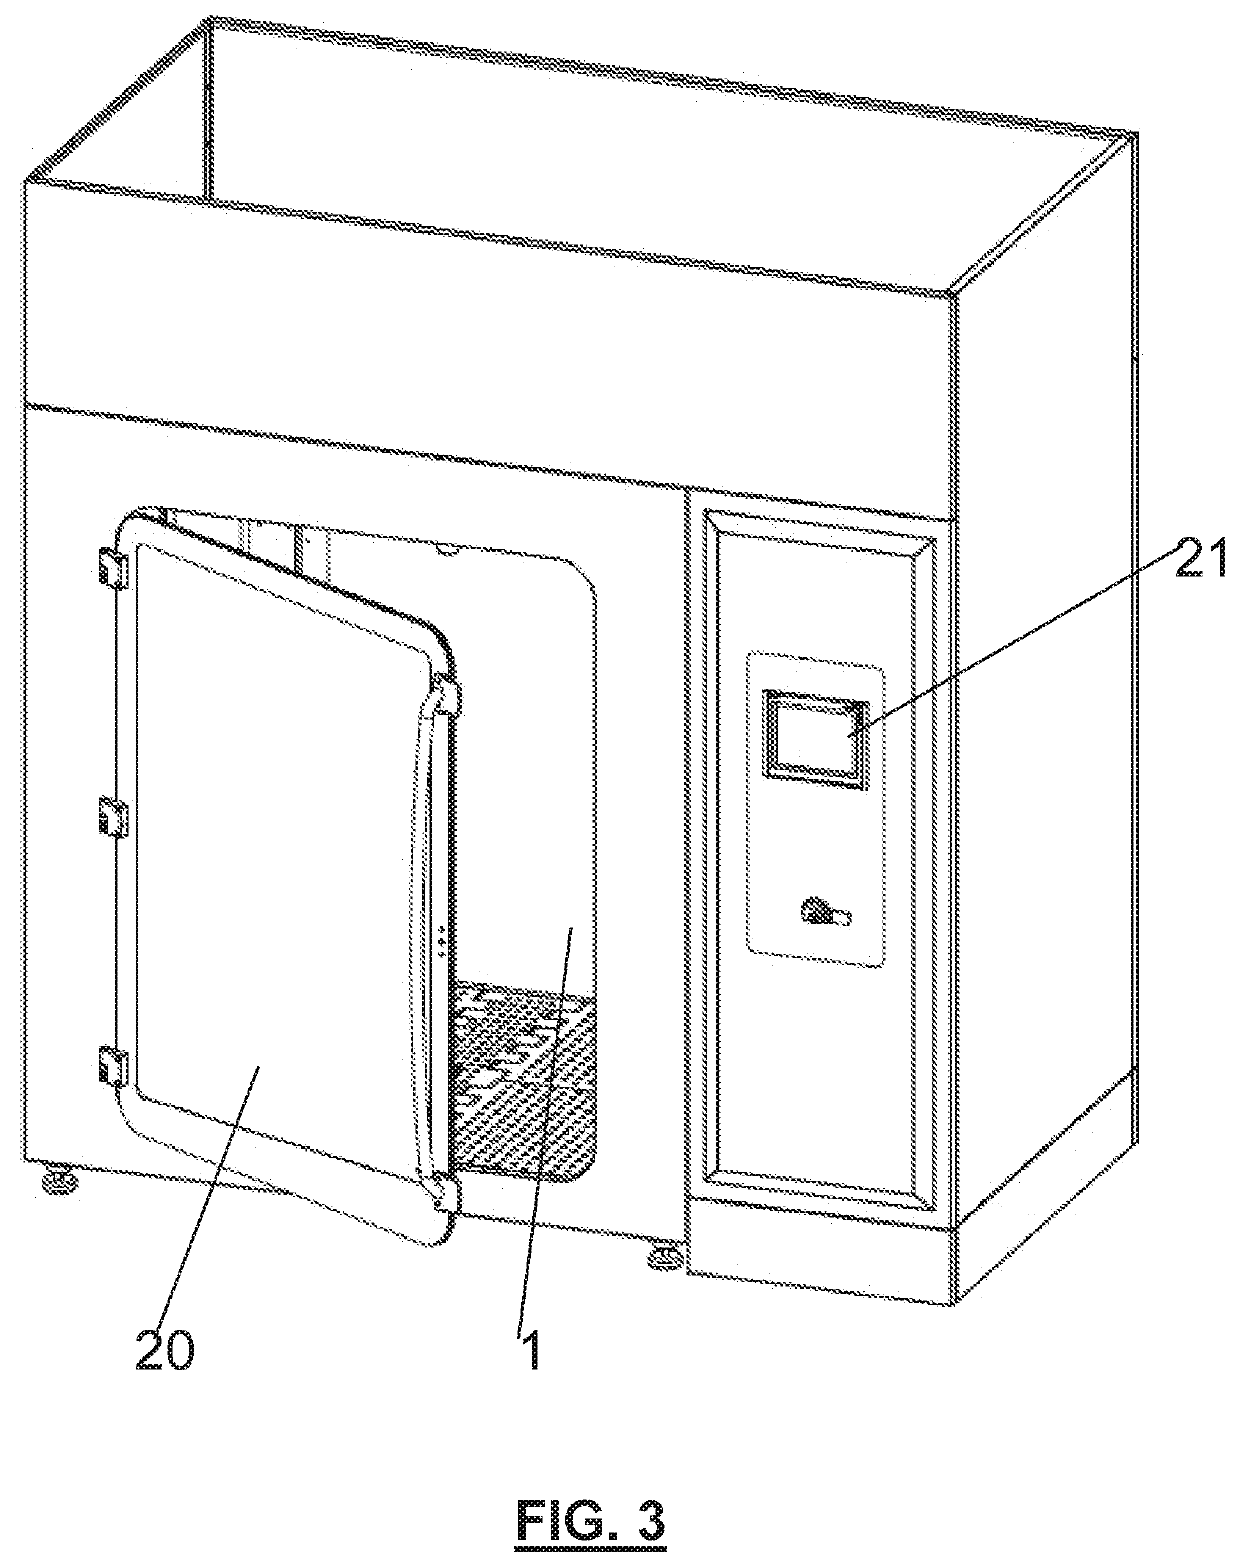 Washing appliance adapted for application in pharmaceutical production and/or preclinical pharmaceutical research centres, for washing parts and components for pharmaceutical production, and method of use of the appliance